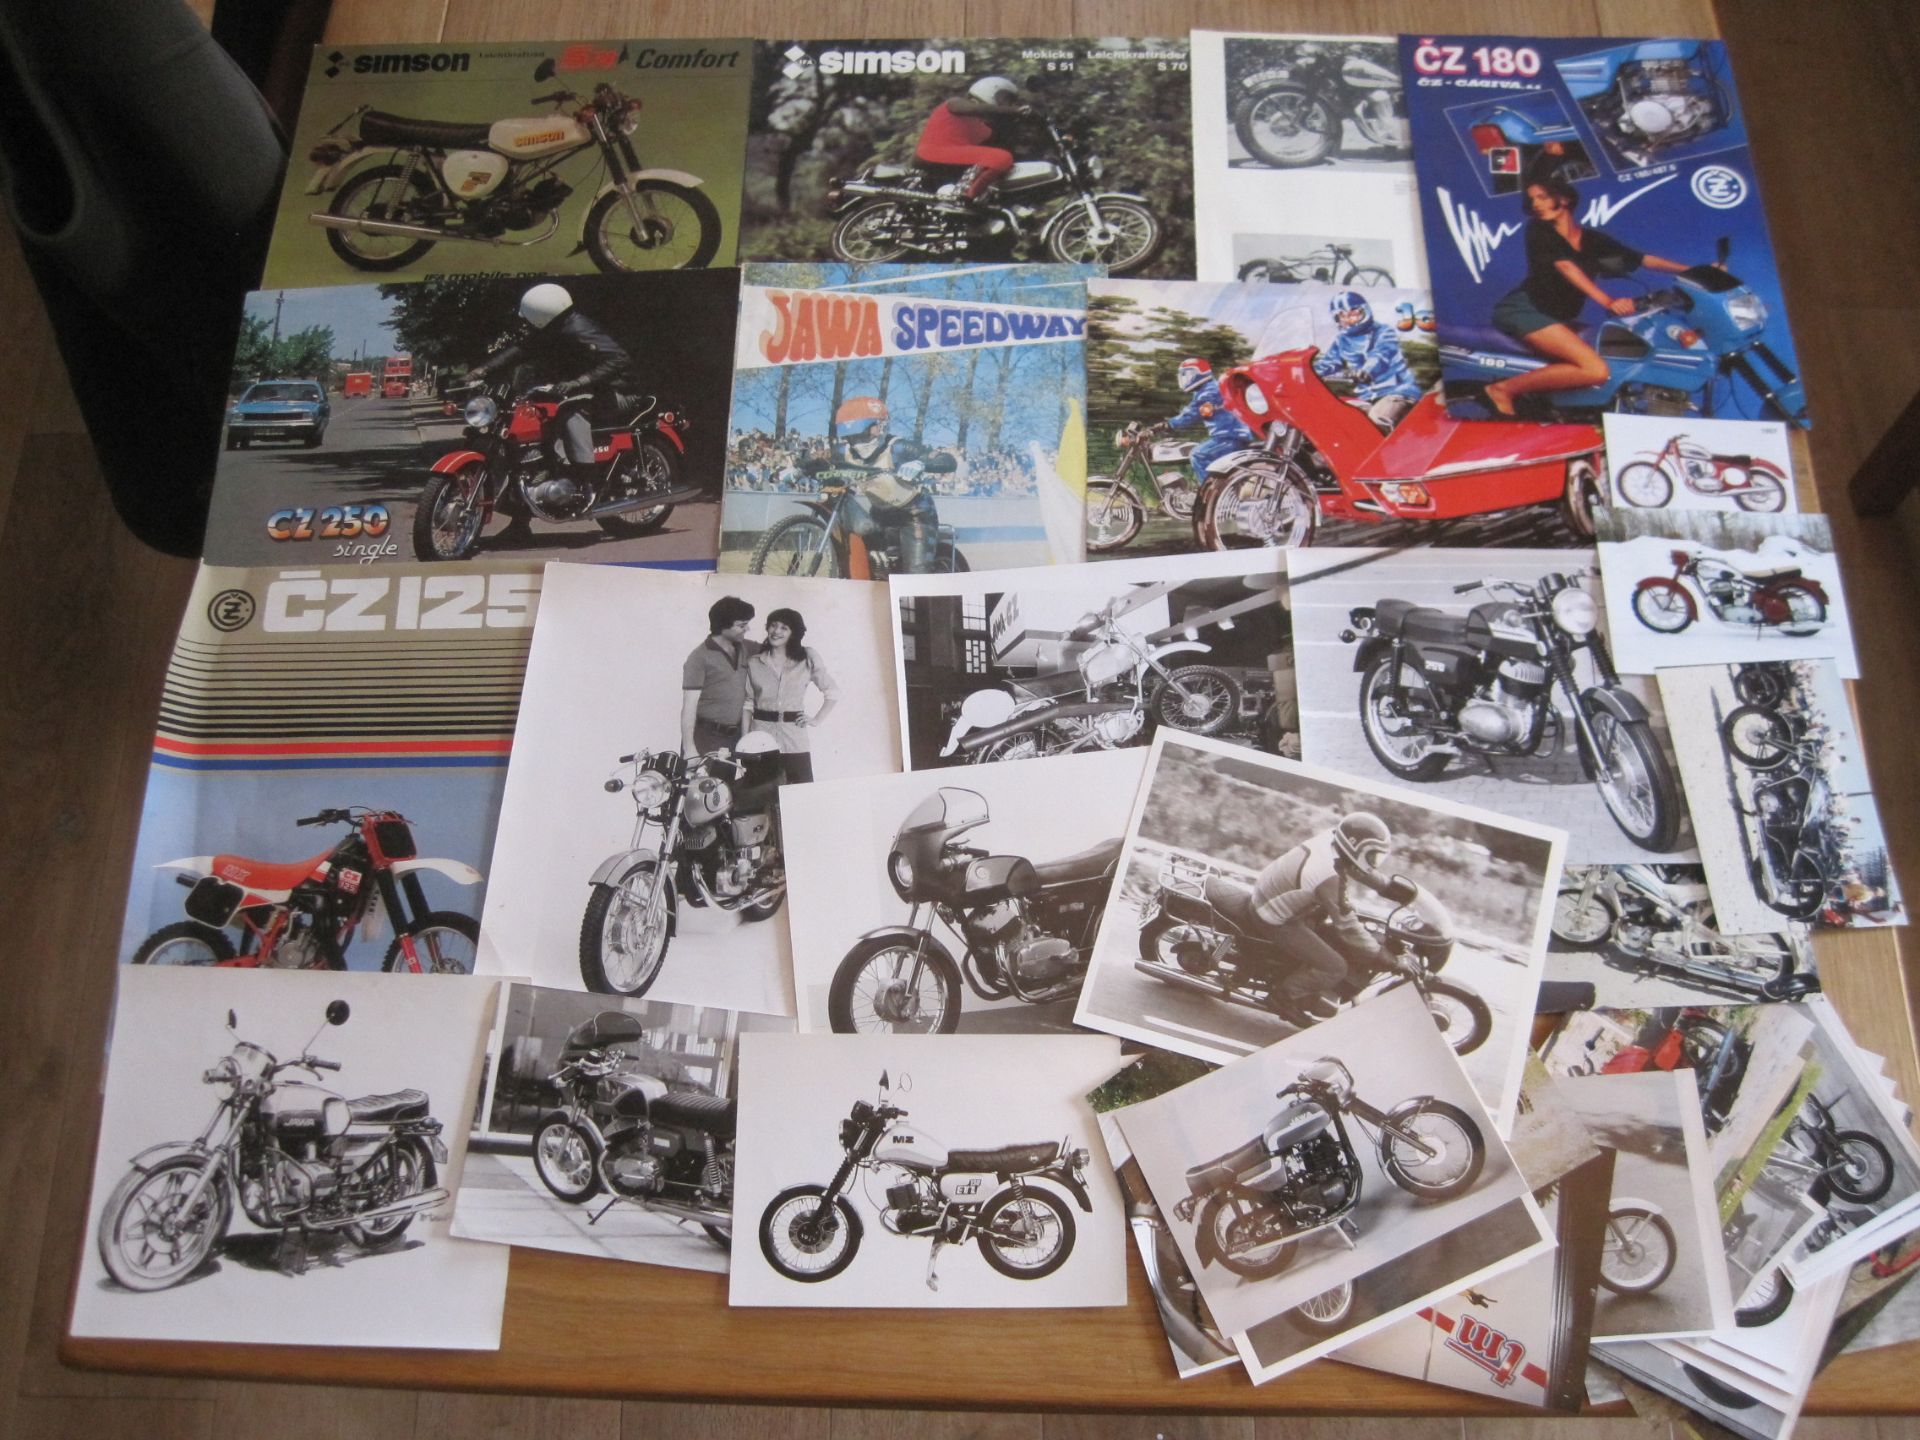 Jawa, CZ etc. A quantity of brochures, factory photos and other images, many annotated by Mick